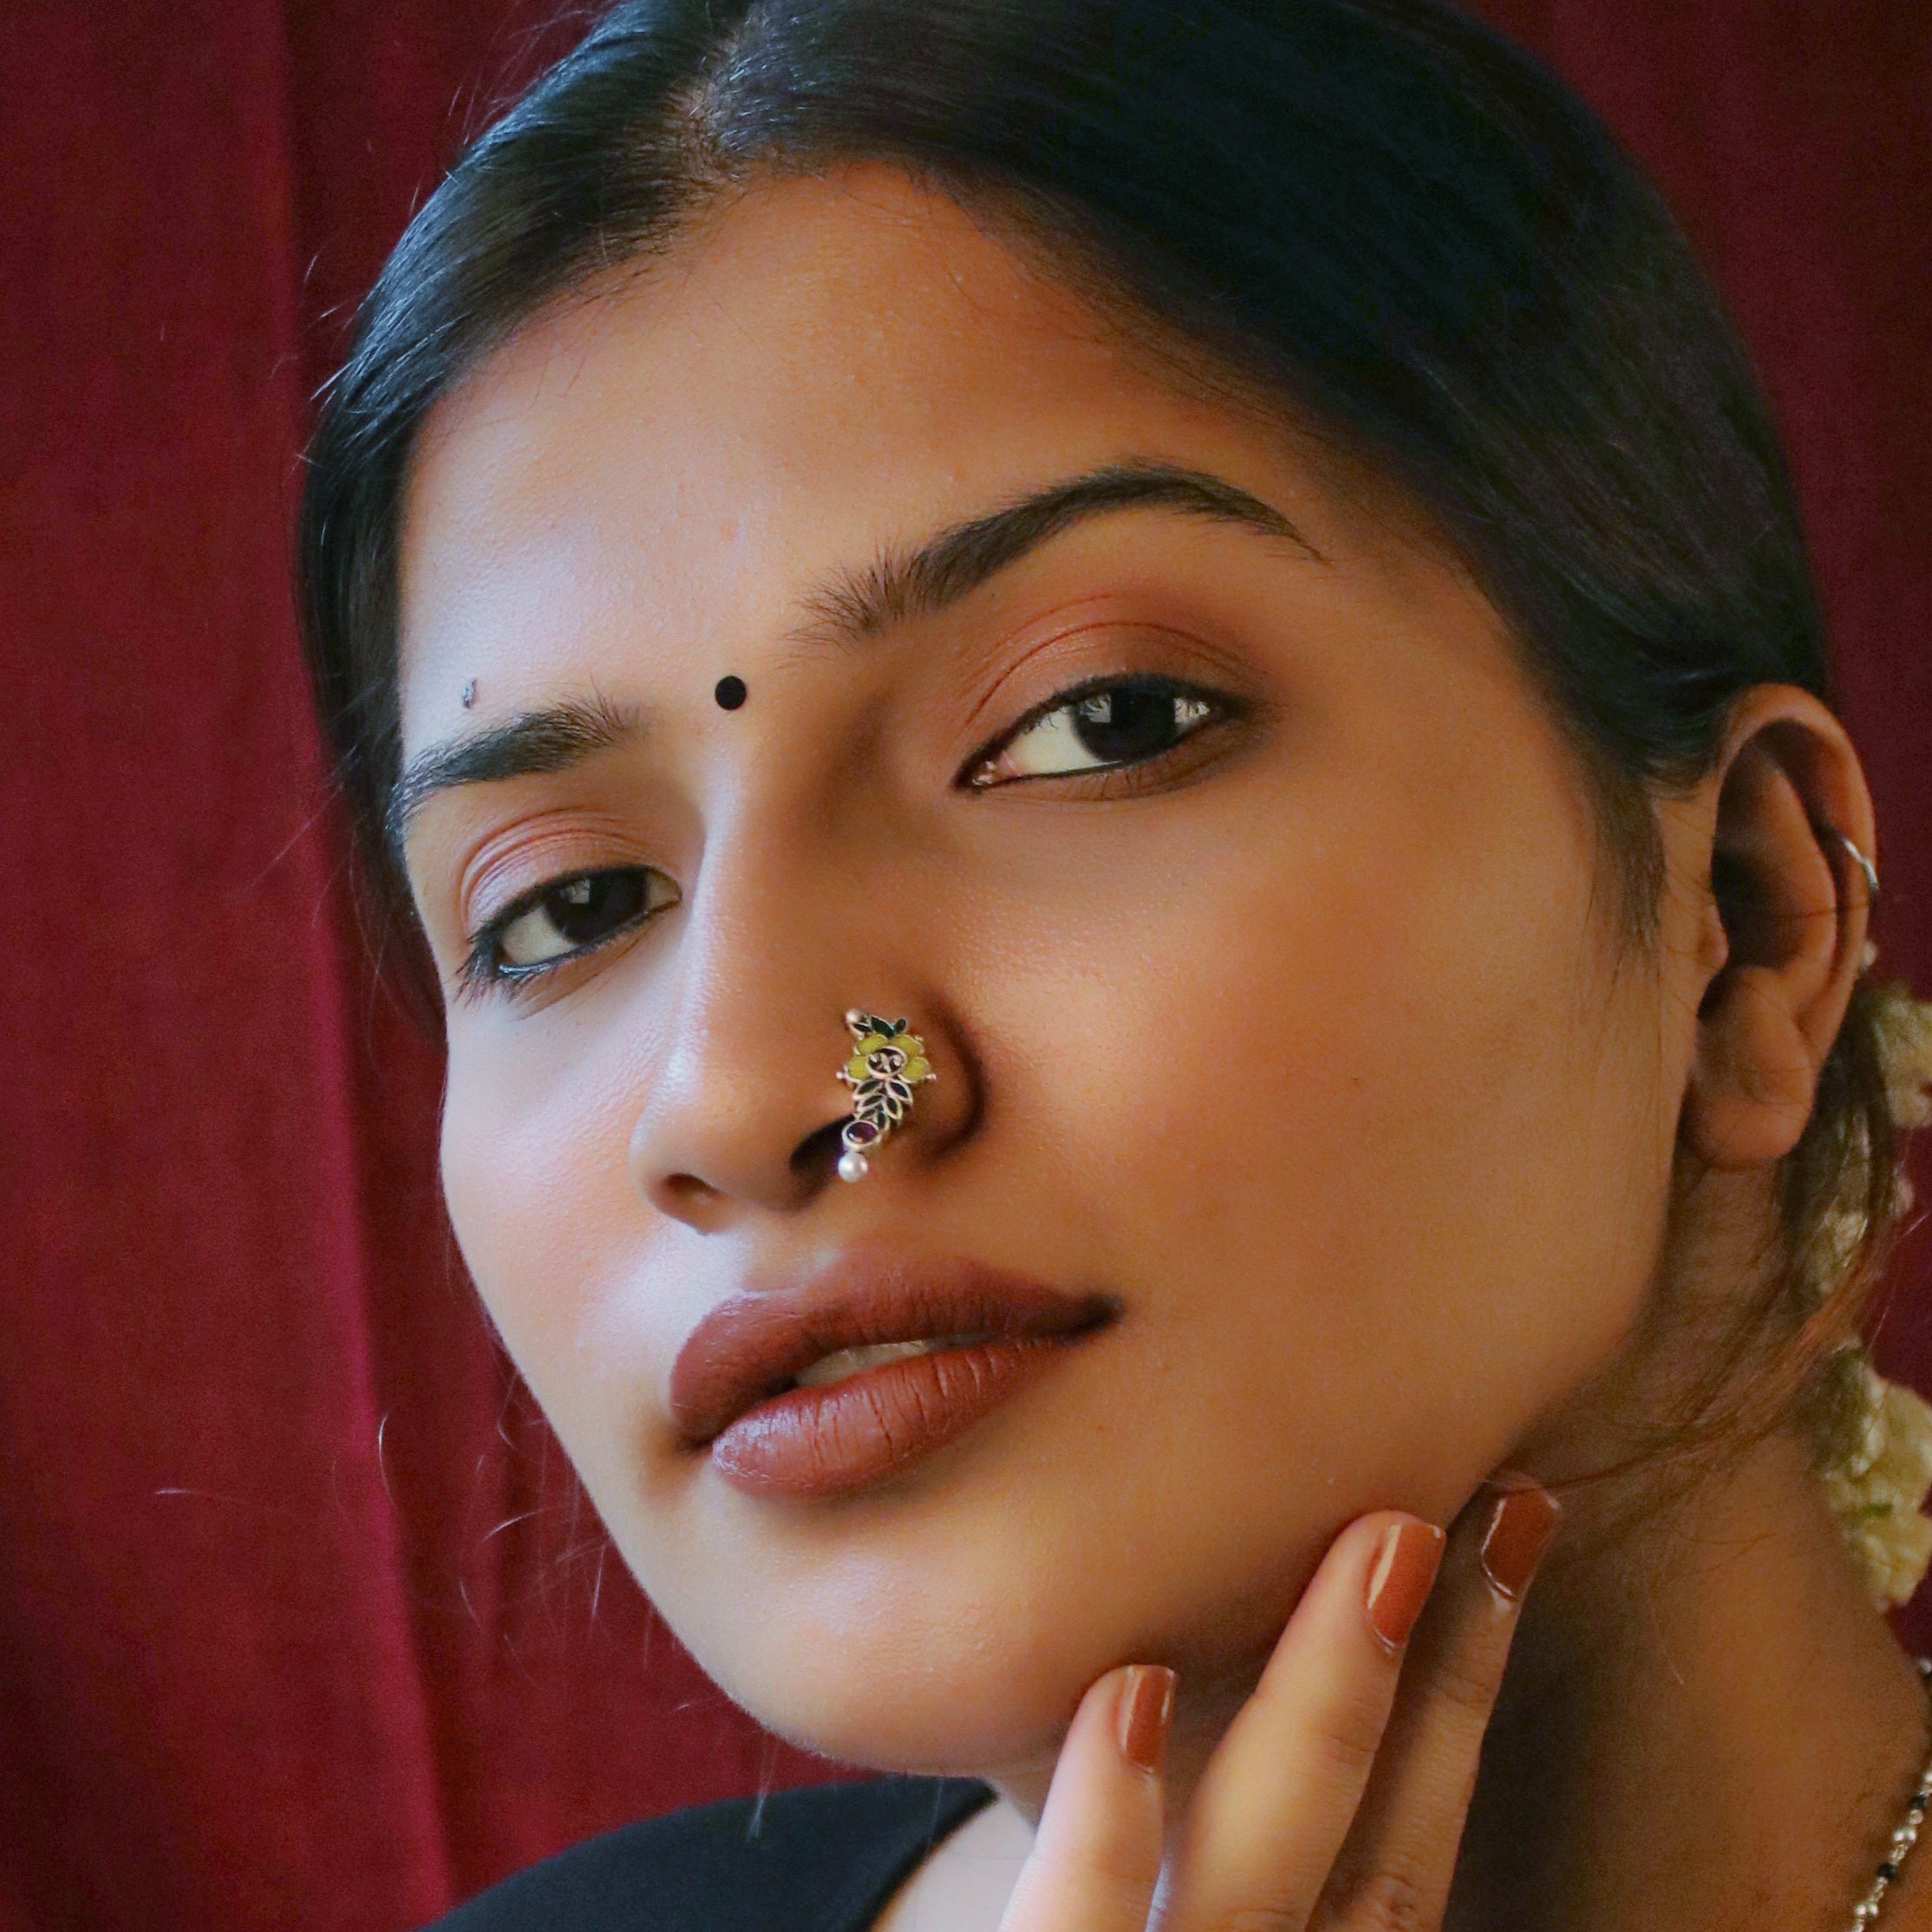 Floral Silver Nath/ Nose Ring By Moha- Clip On